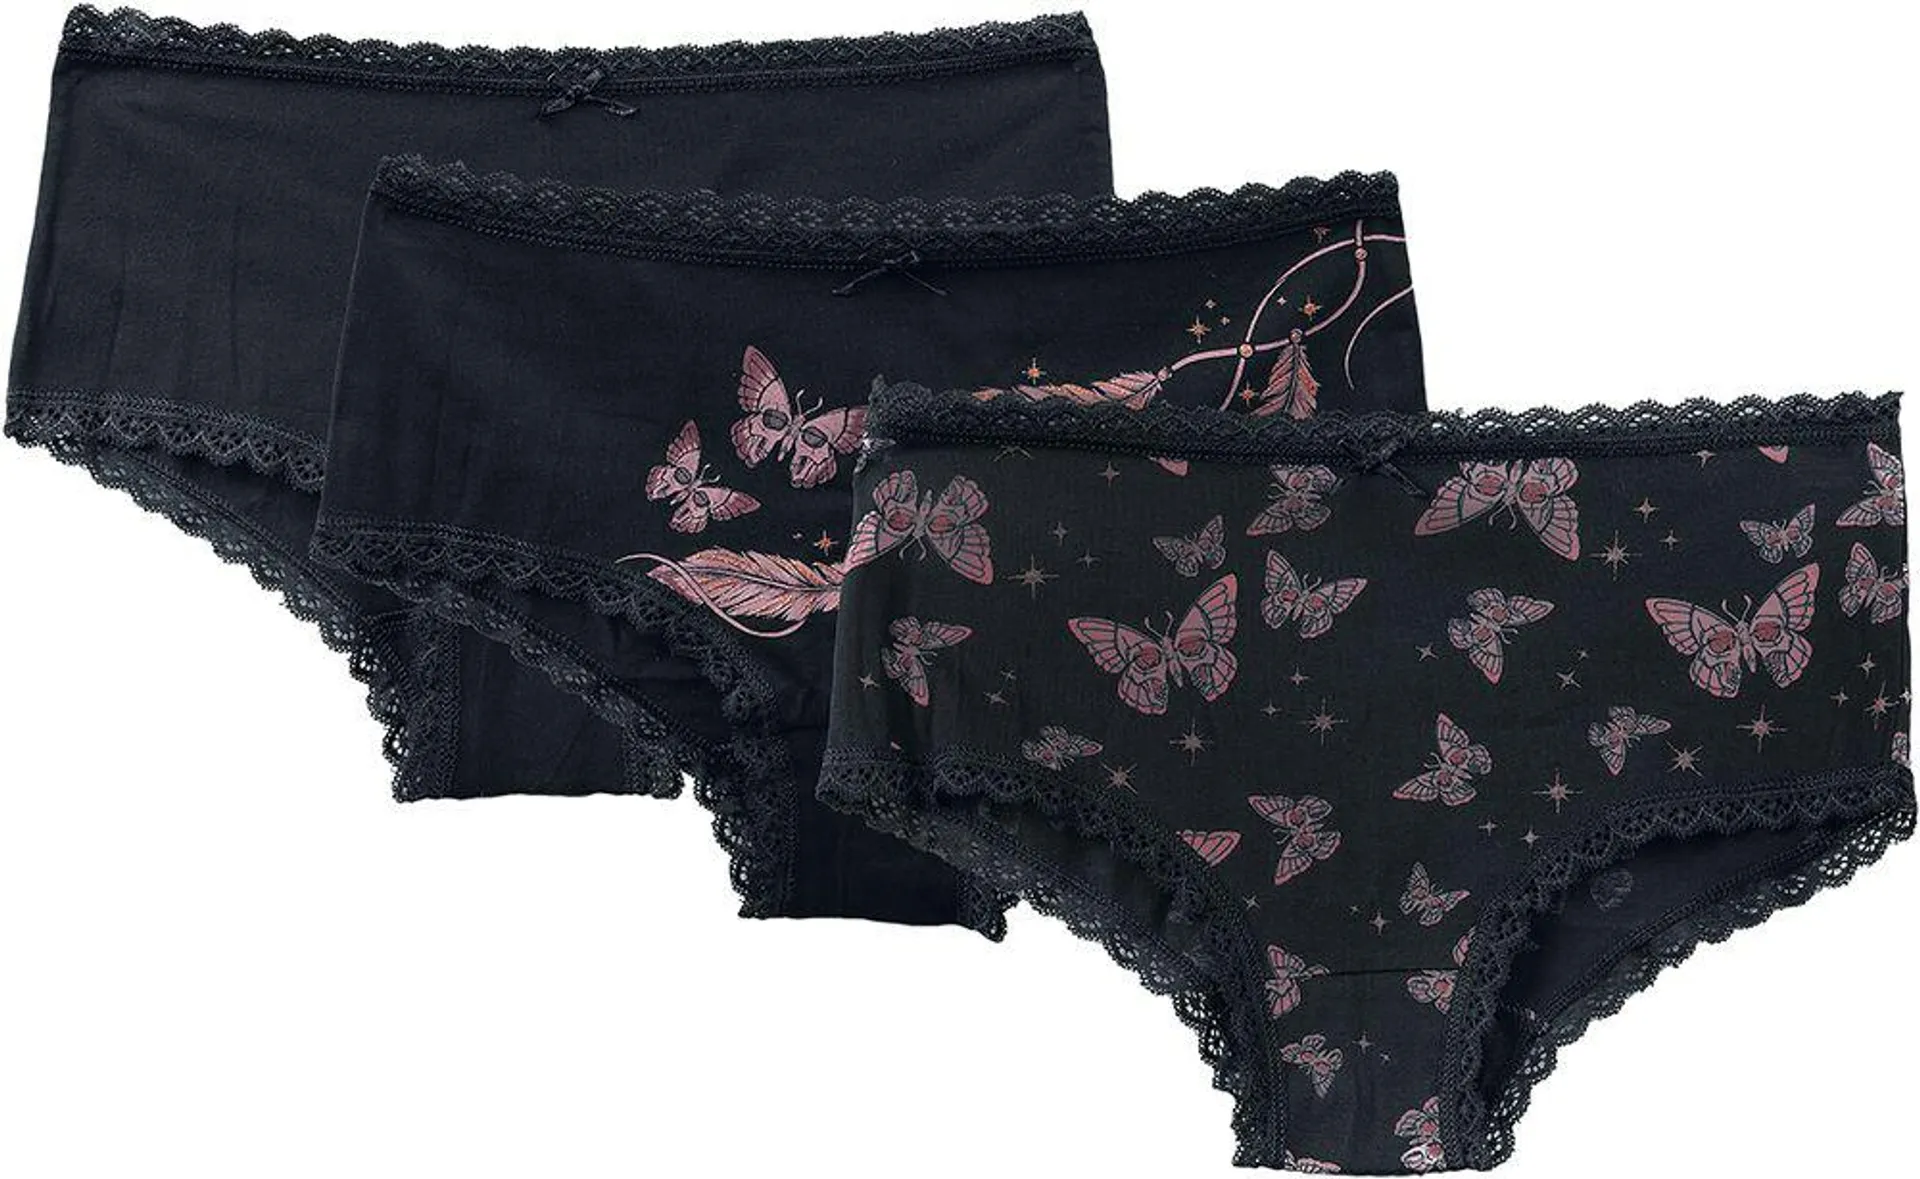 "3 Pack Panties with Butterfly Print"